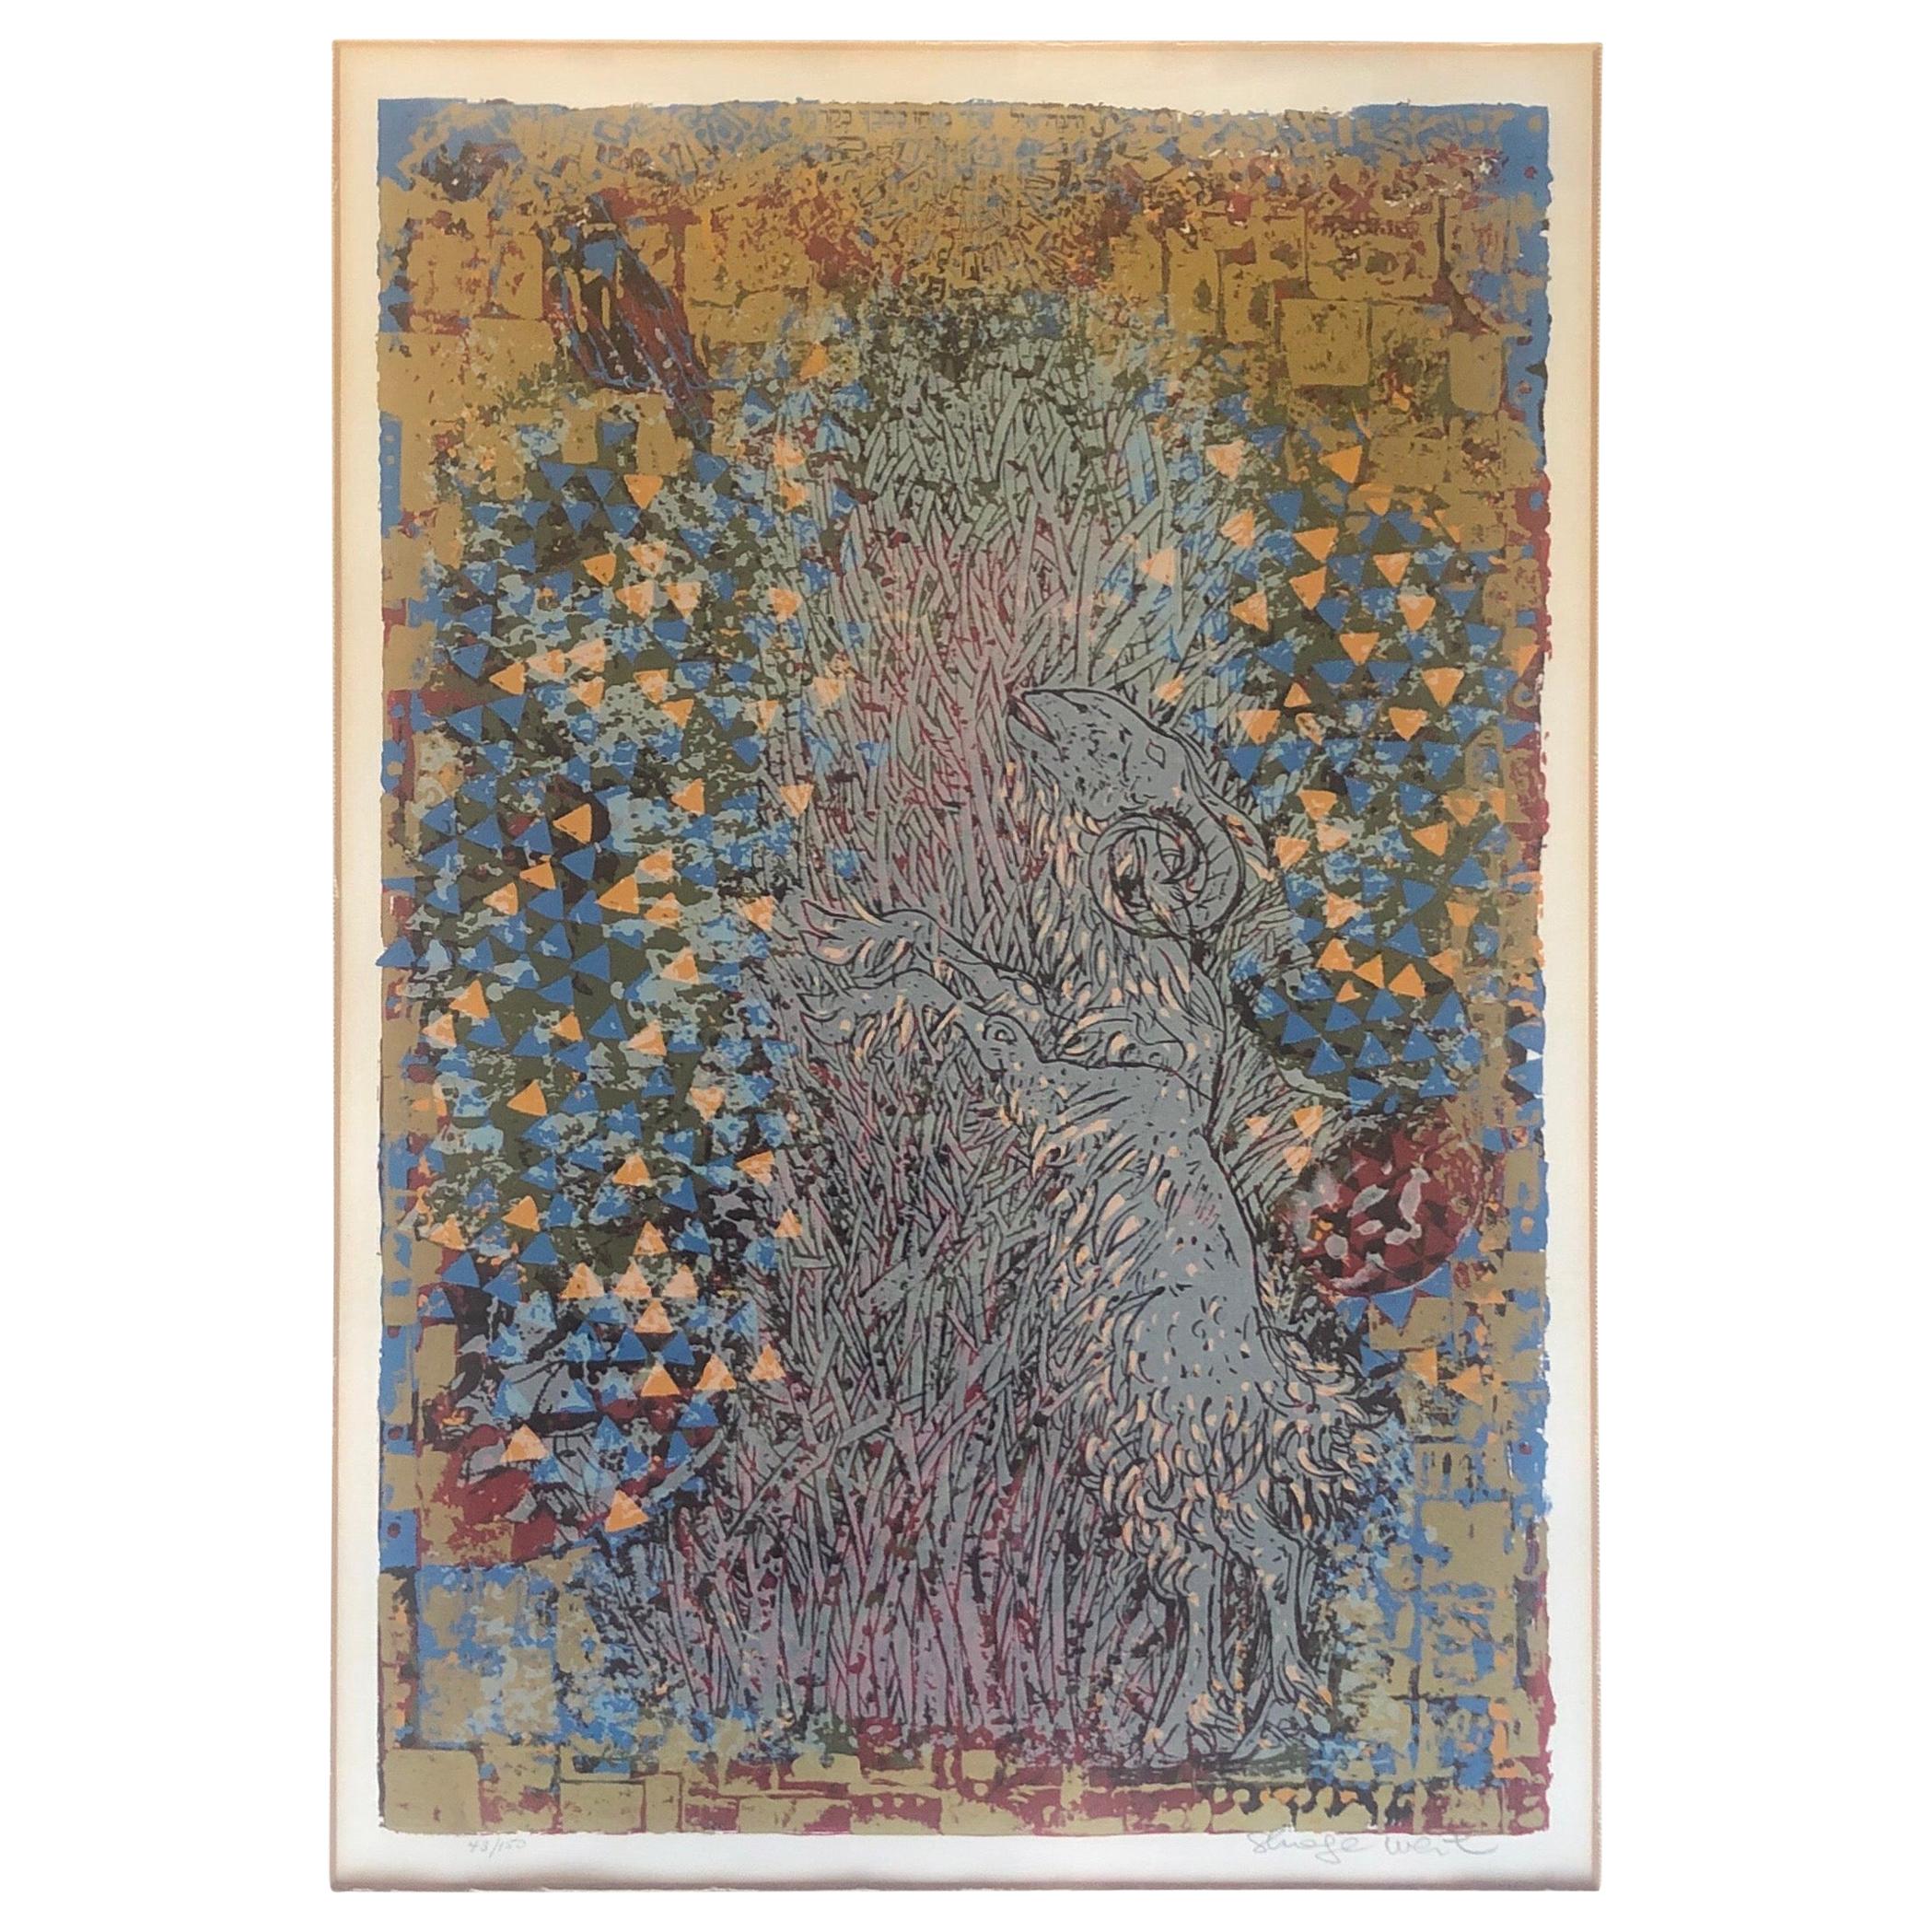 Signed and Numbered Abstract Serigraph "The Ram in Thicket" by Shraga Weil